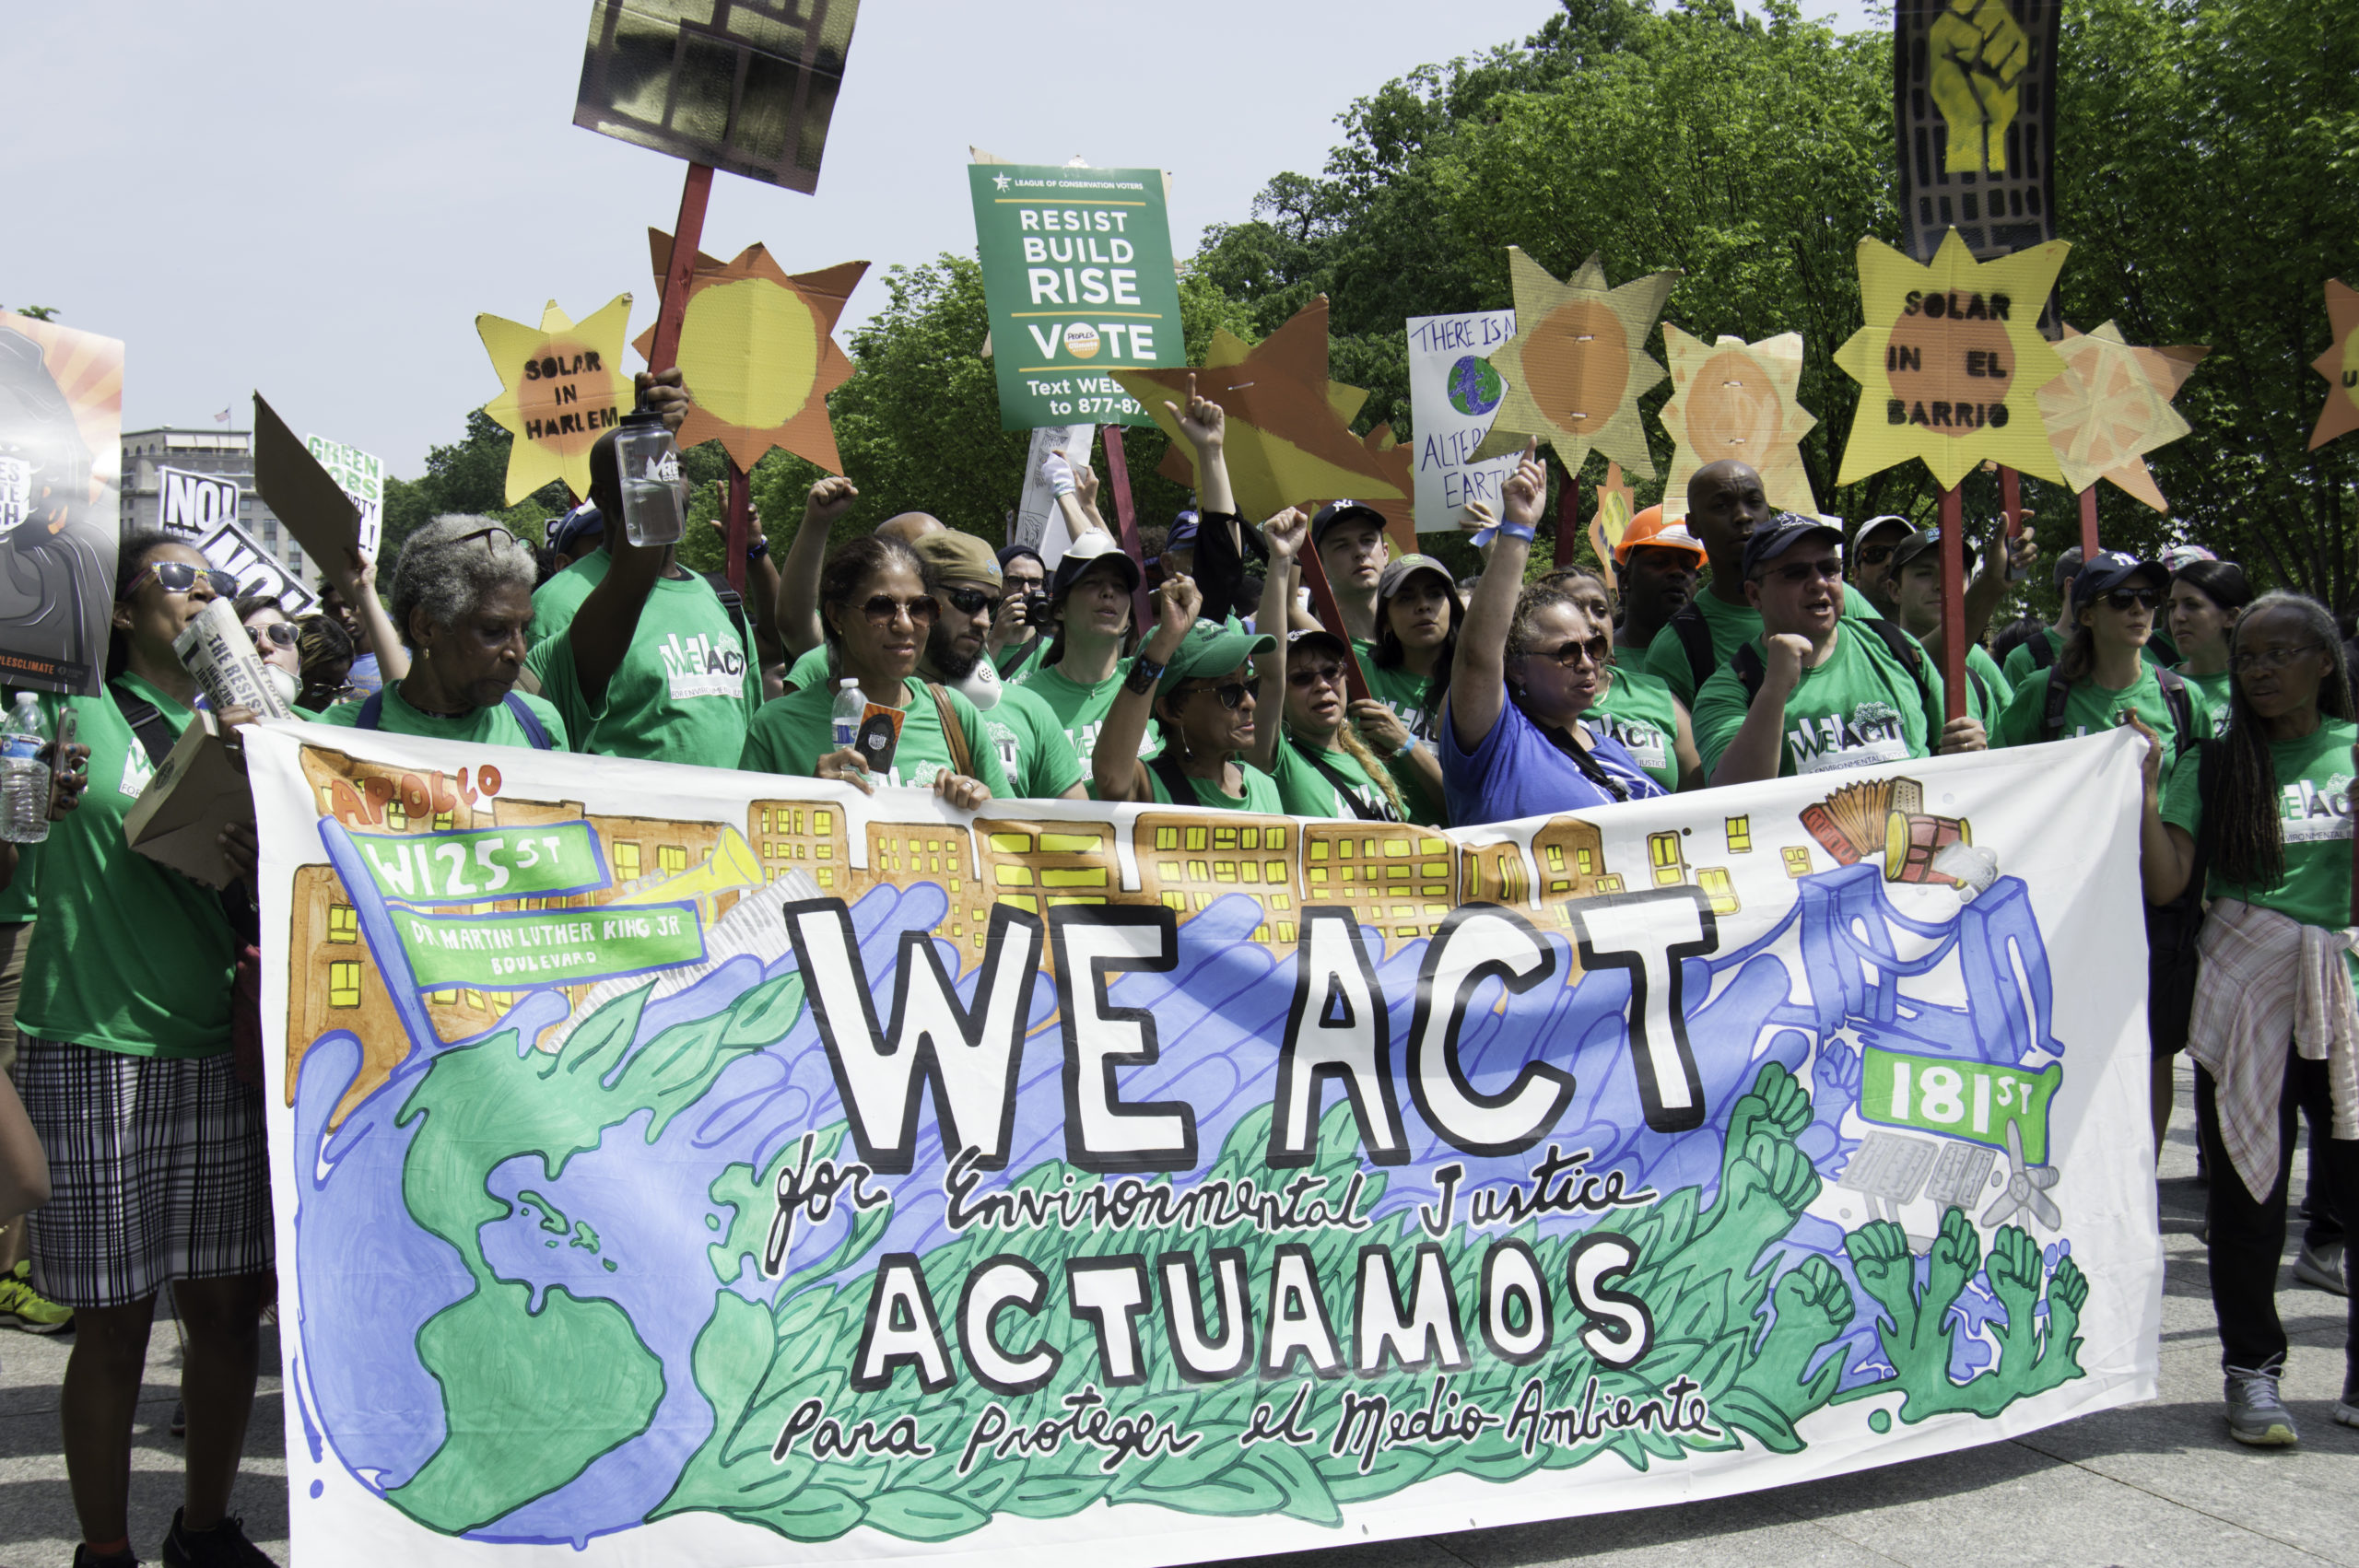 Shepard (centre) marches at the People's Climate March in 2017. (Photo: WE ACT)